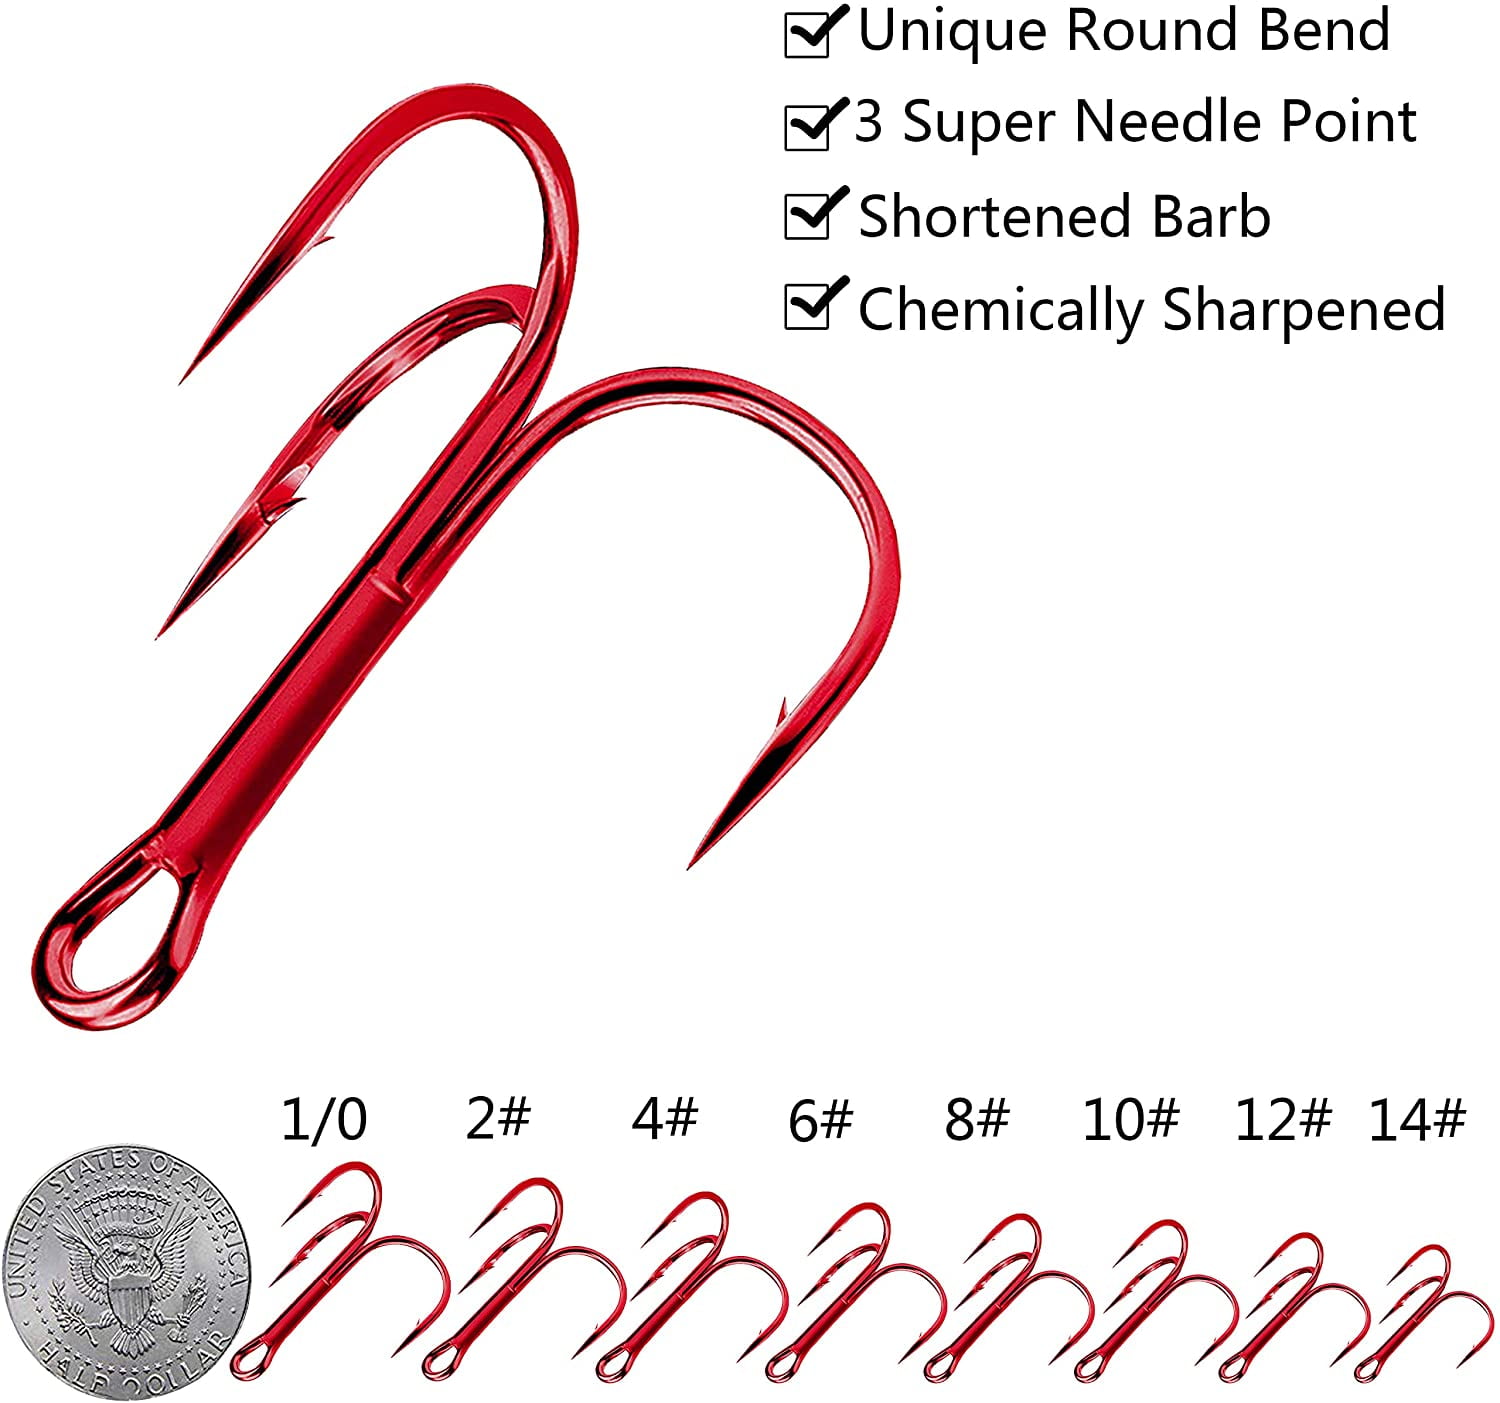 Fishing Red Treble Hooks,100pcs Sharp Round Bend Barbed Treble Hook High-Carbon  Steel Hooks for Bass Trout Saltwater Freshwater Size 14# 